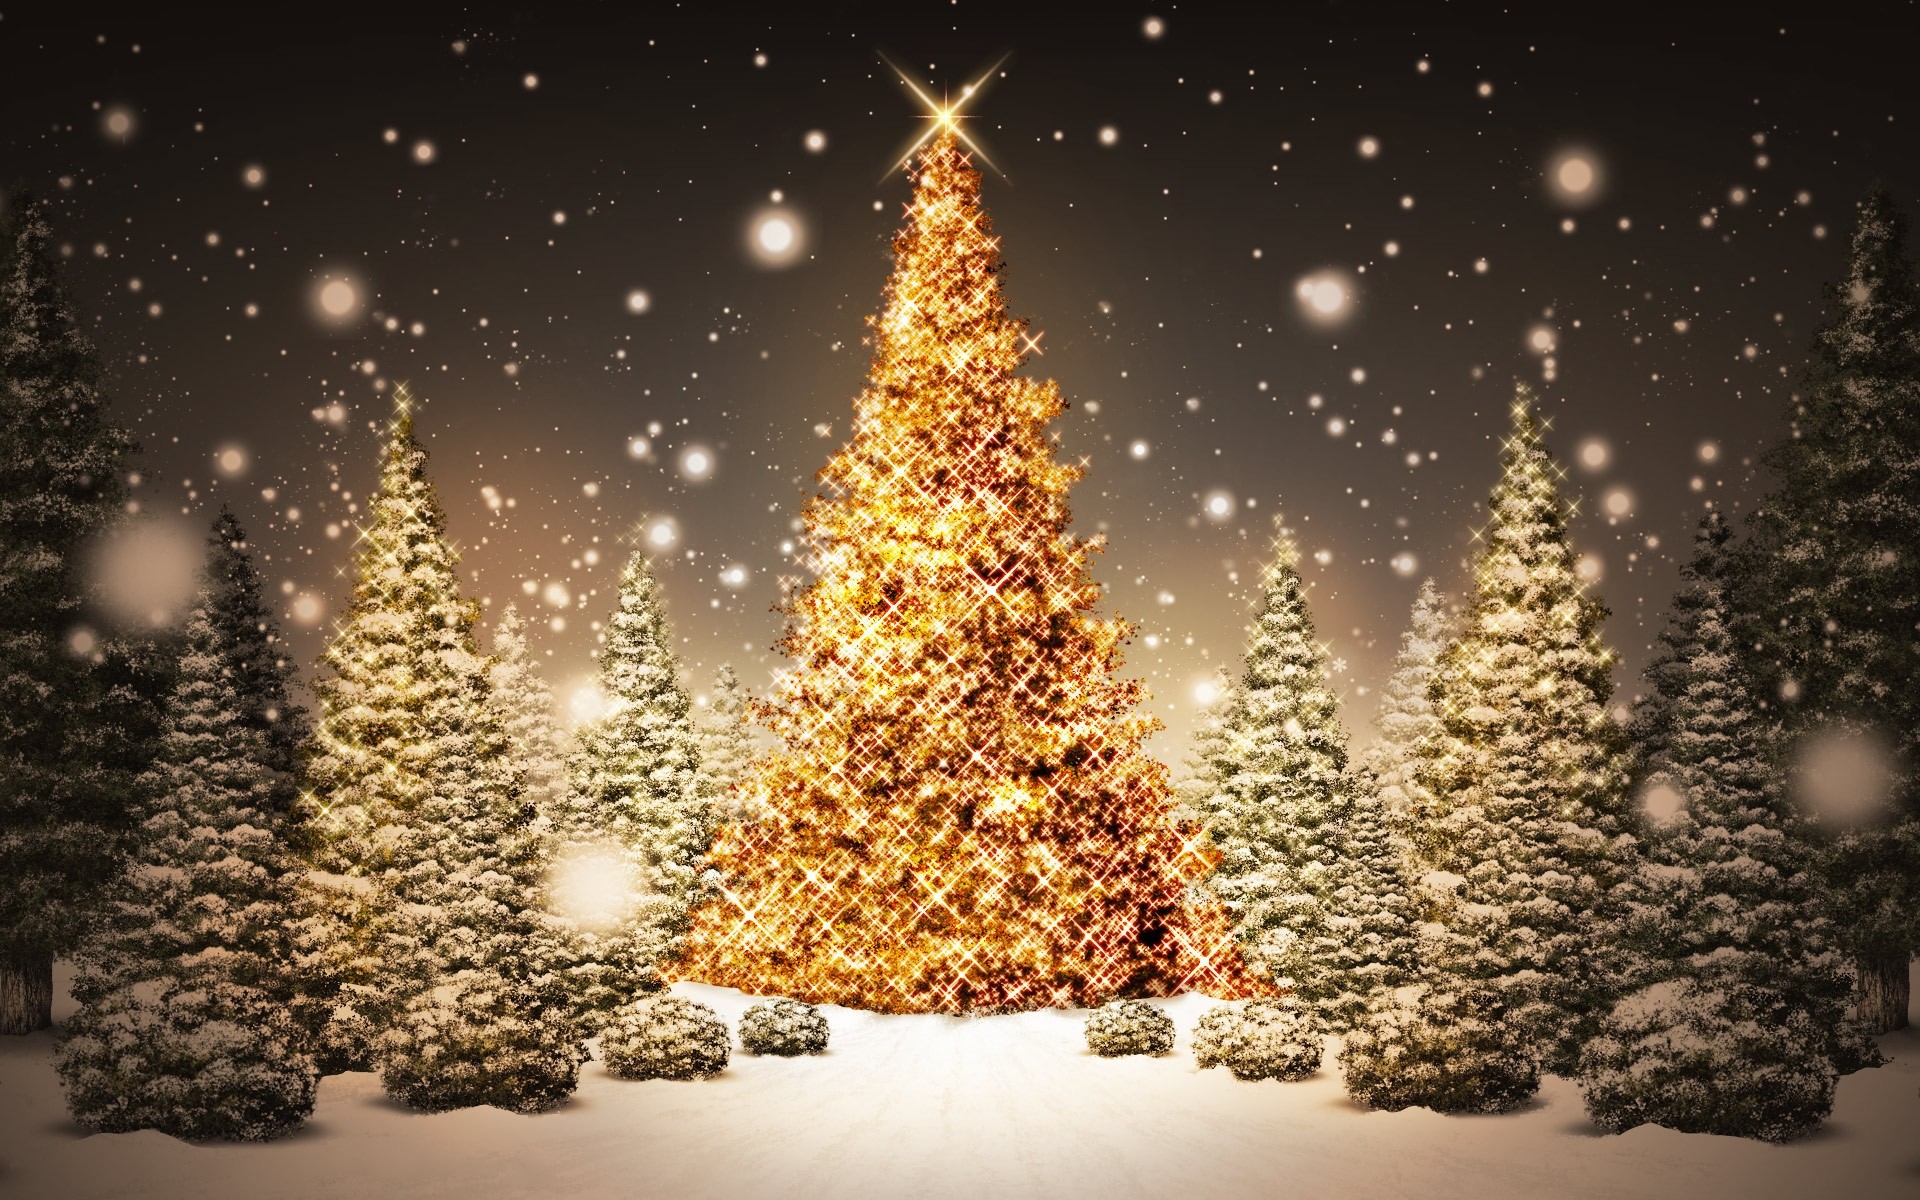 1920x1200 Wallpapers | Free 3d Christmas Tree Backgrounds | Desktop Wallpapers .